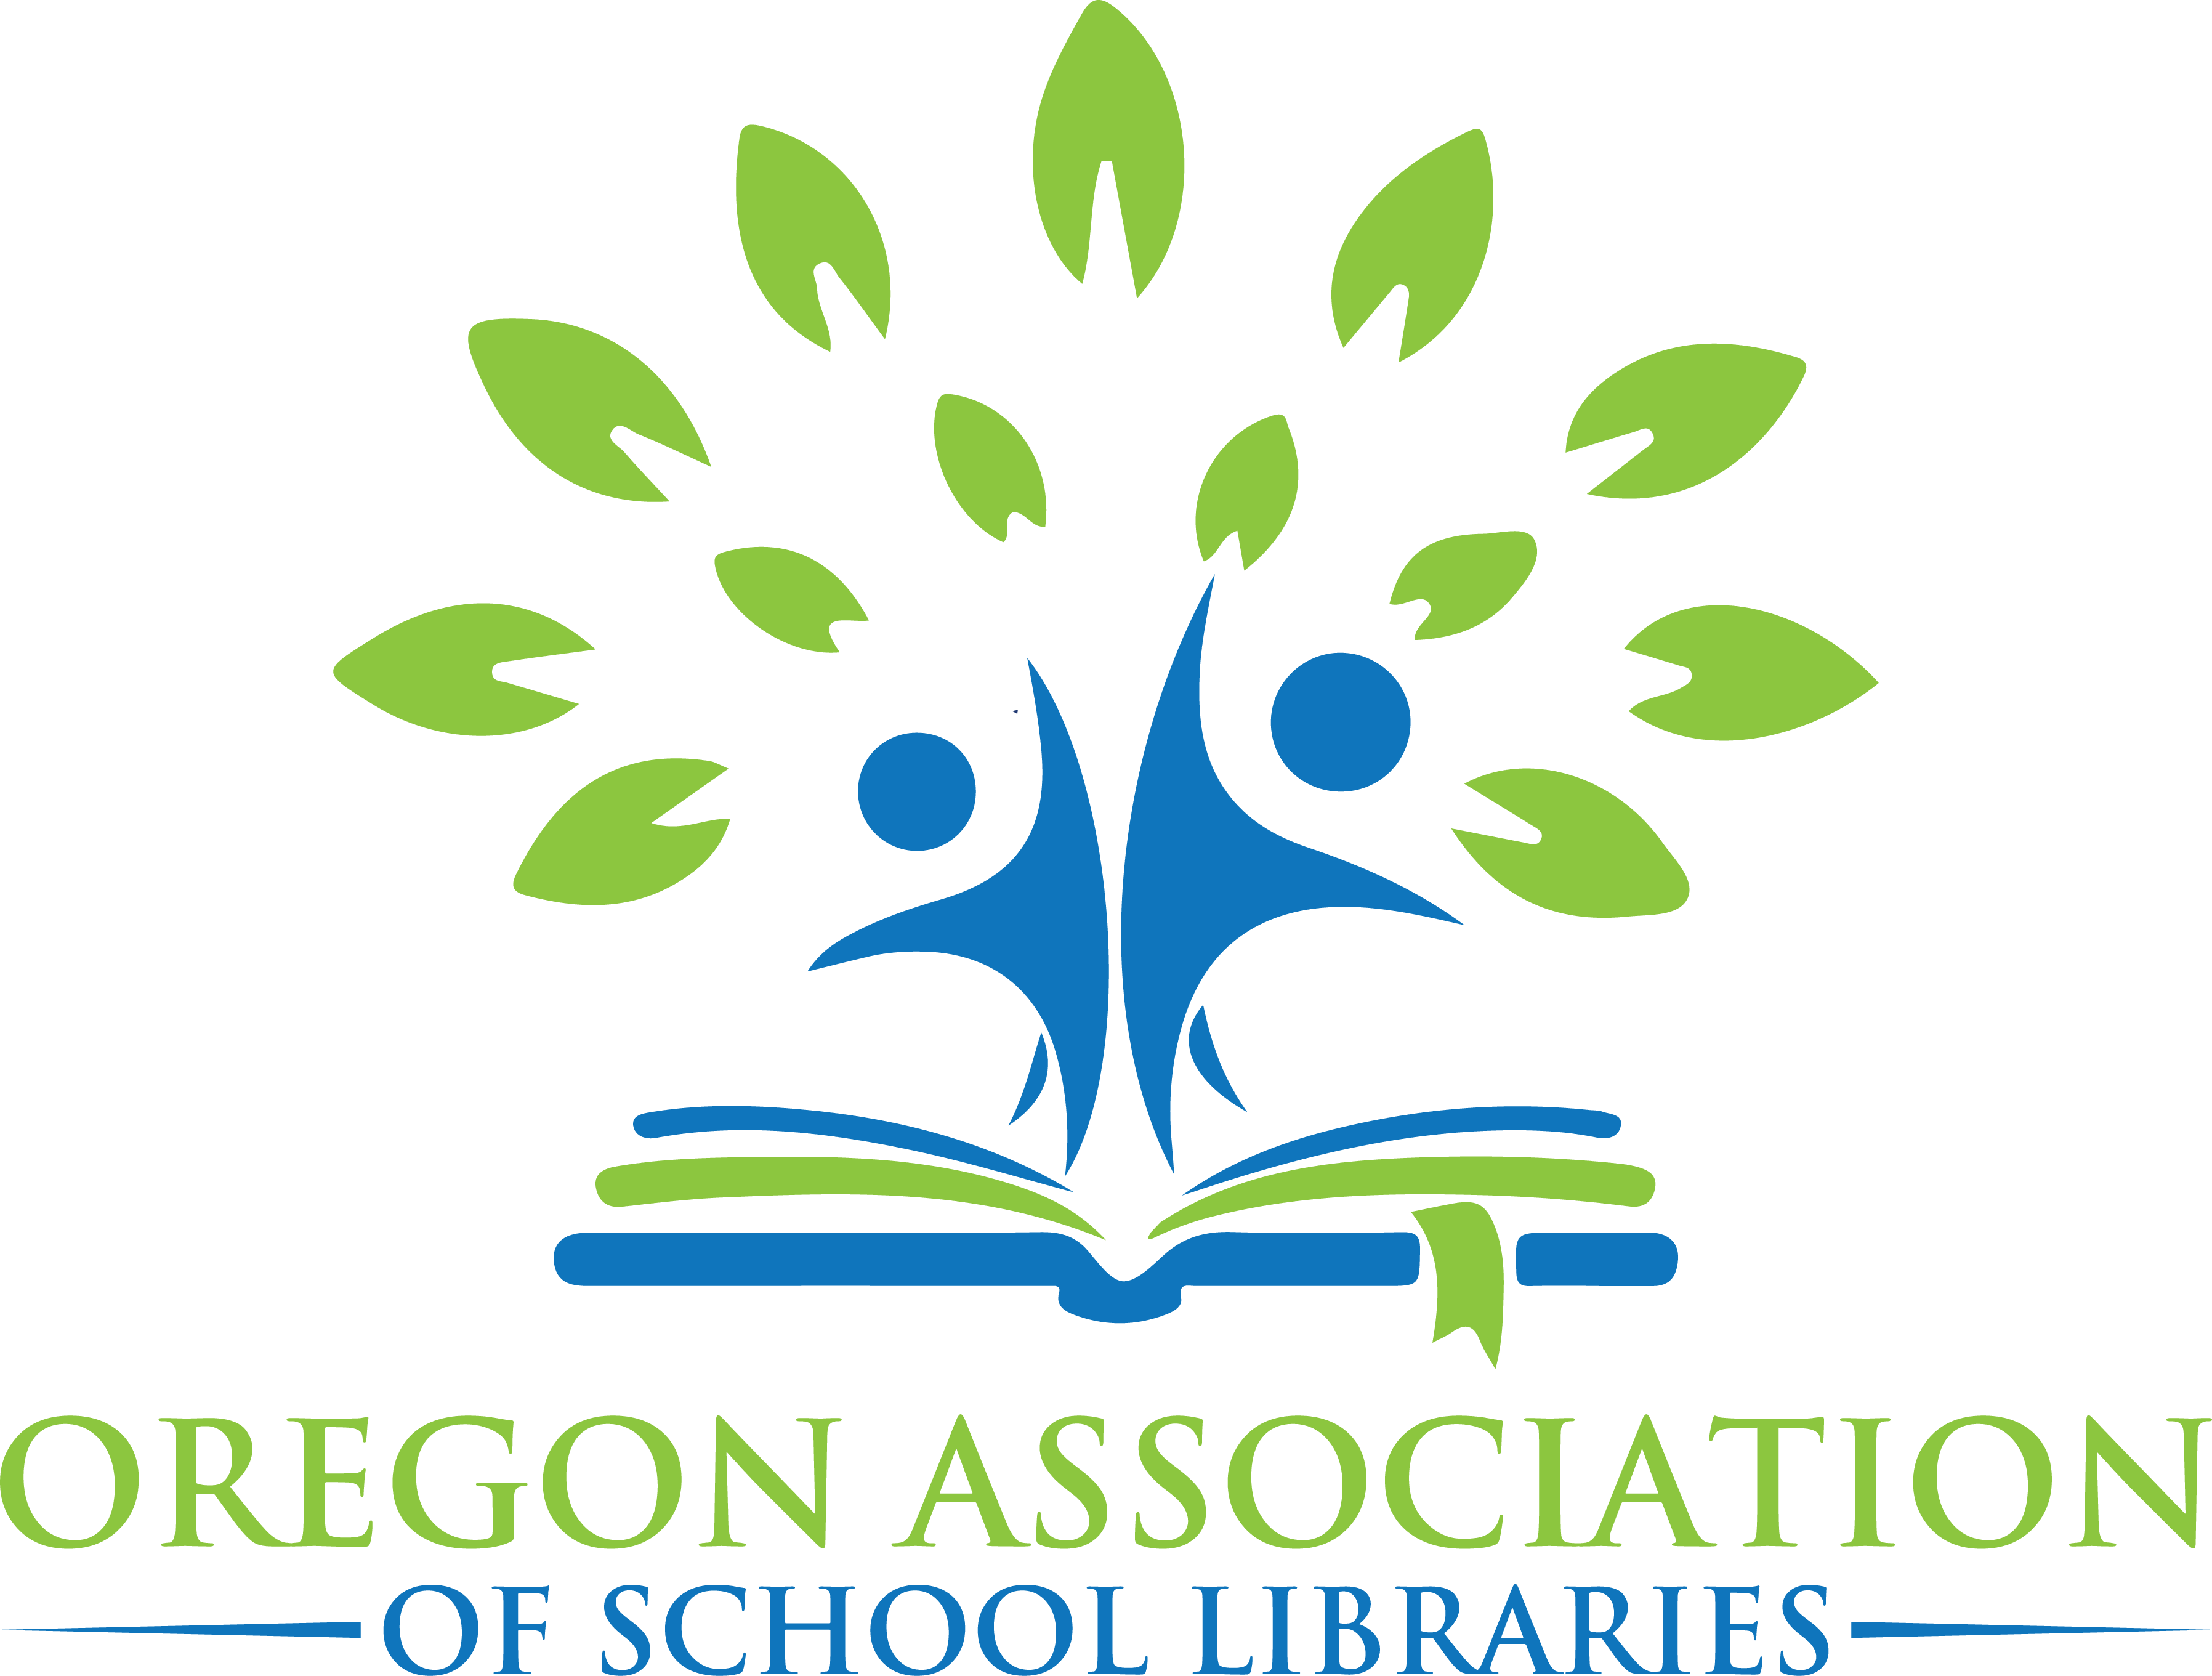 the logo for Oregon Association of School Libraries